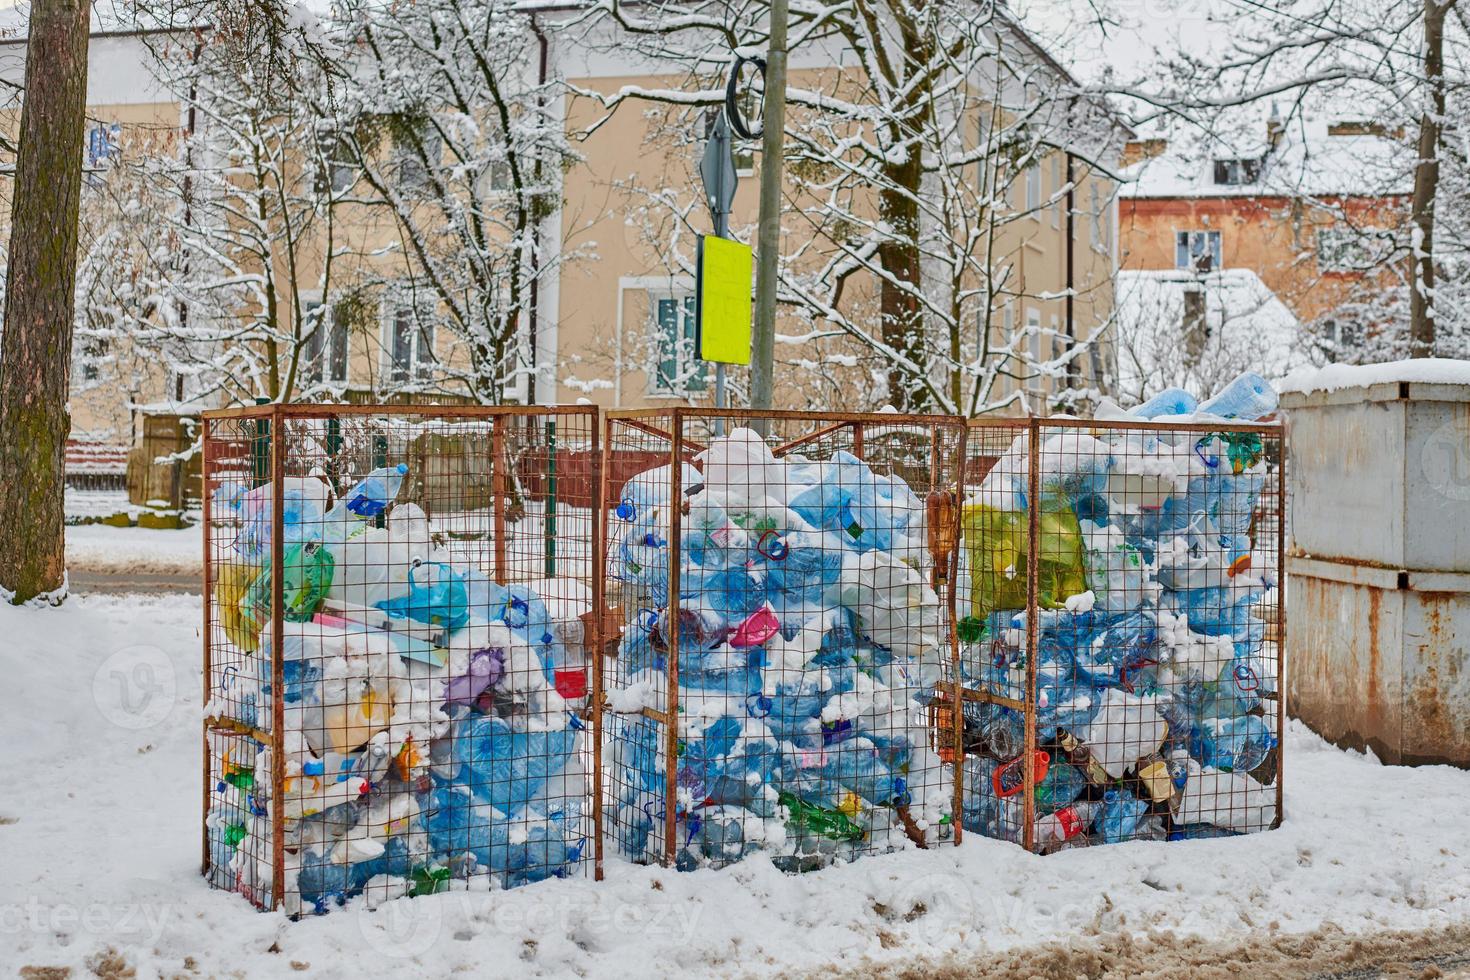 Three dumpsters full of plastic bottles, bags and waste photo